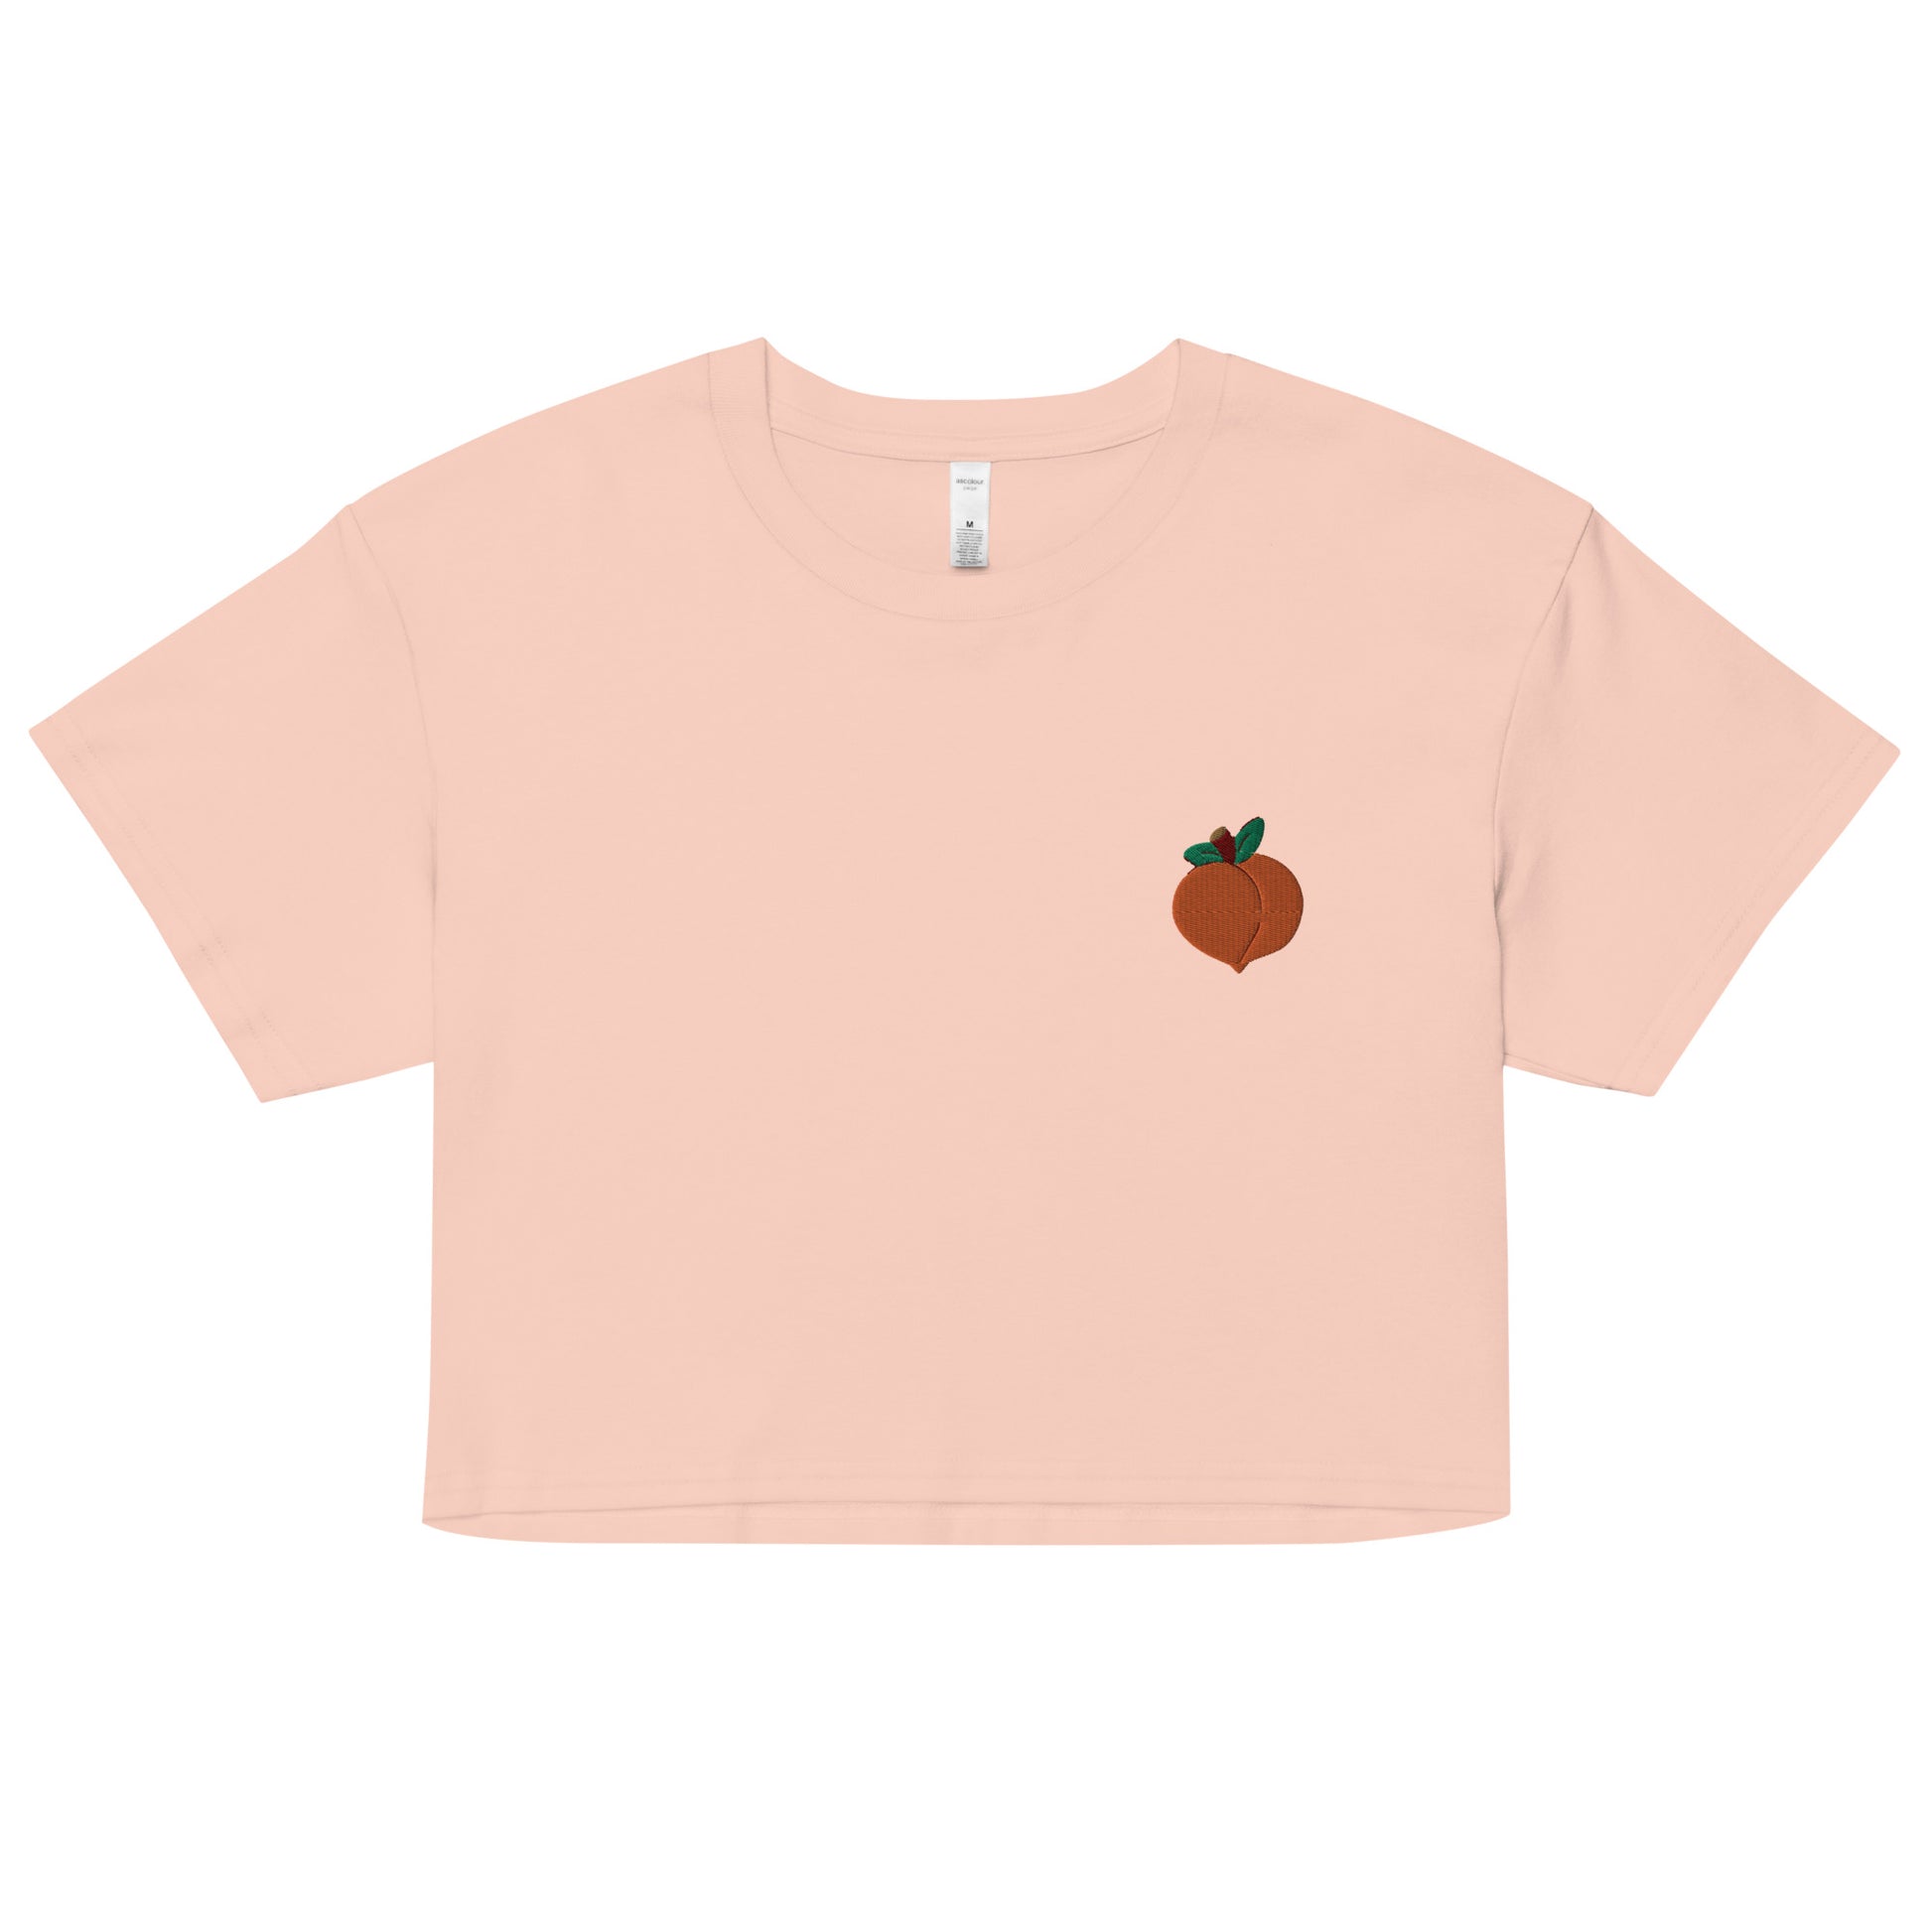 A relaxed, modest pale pink crop top features a subtle peach emoji embroidery. Adding a touch of mischief to your look—a playful celebration of lgbtq culture! Made from 100% combed cotton. Available in Extra Small, Small, Medium, Large, Extra Large.